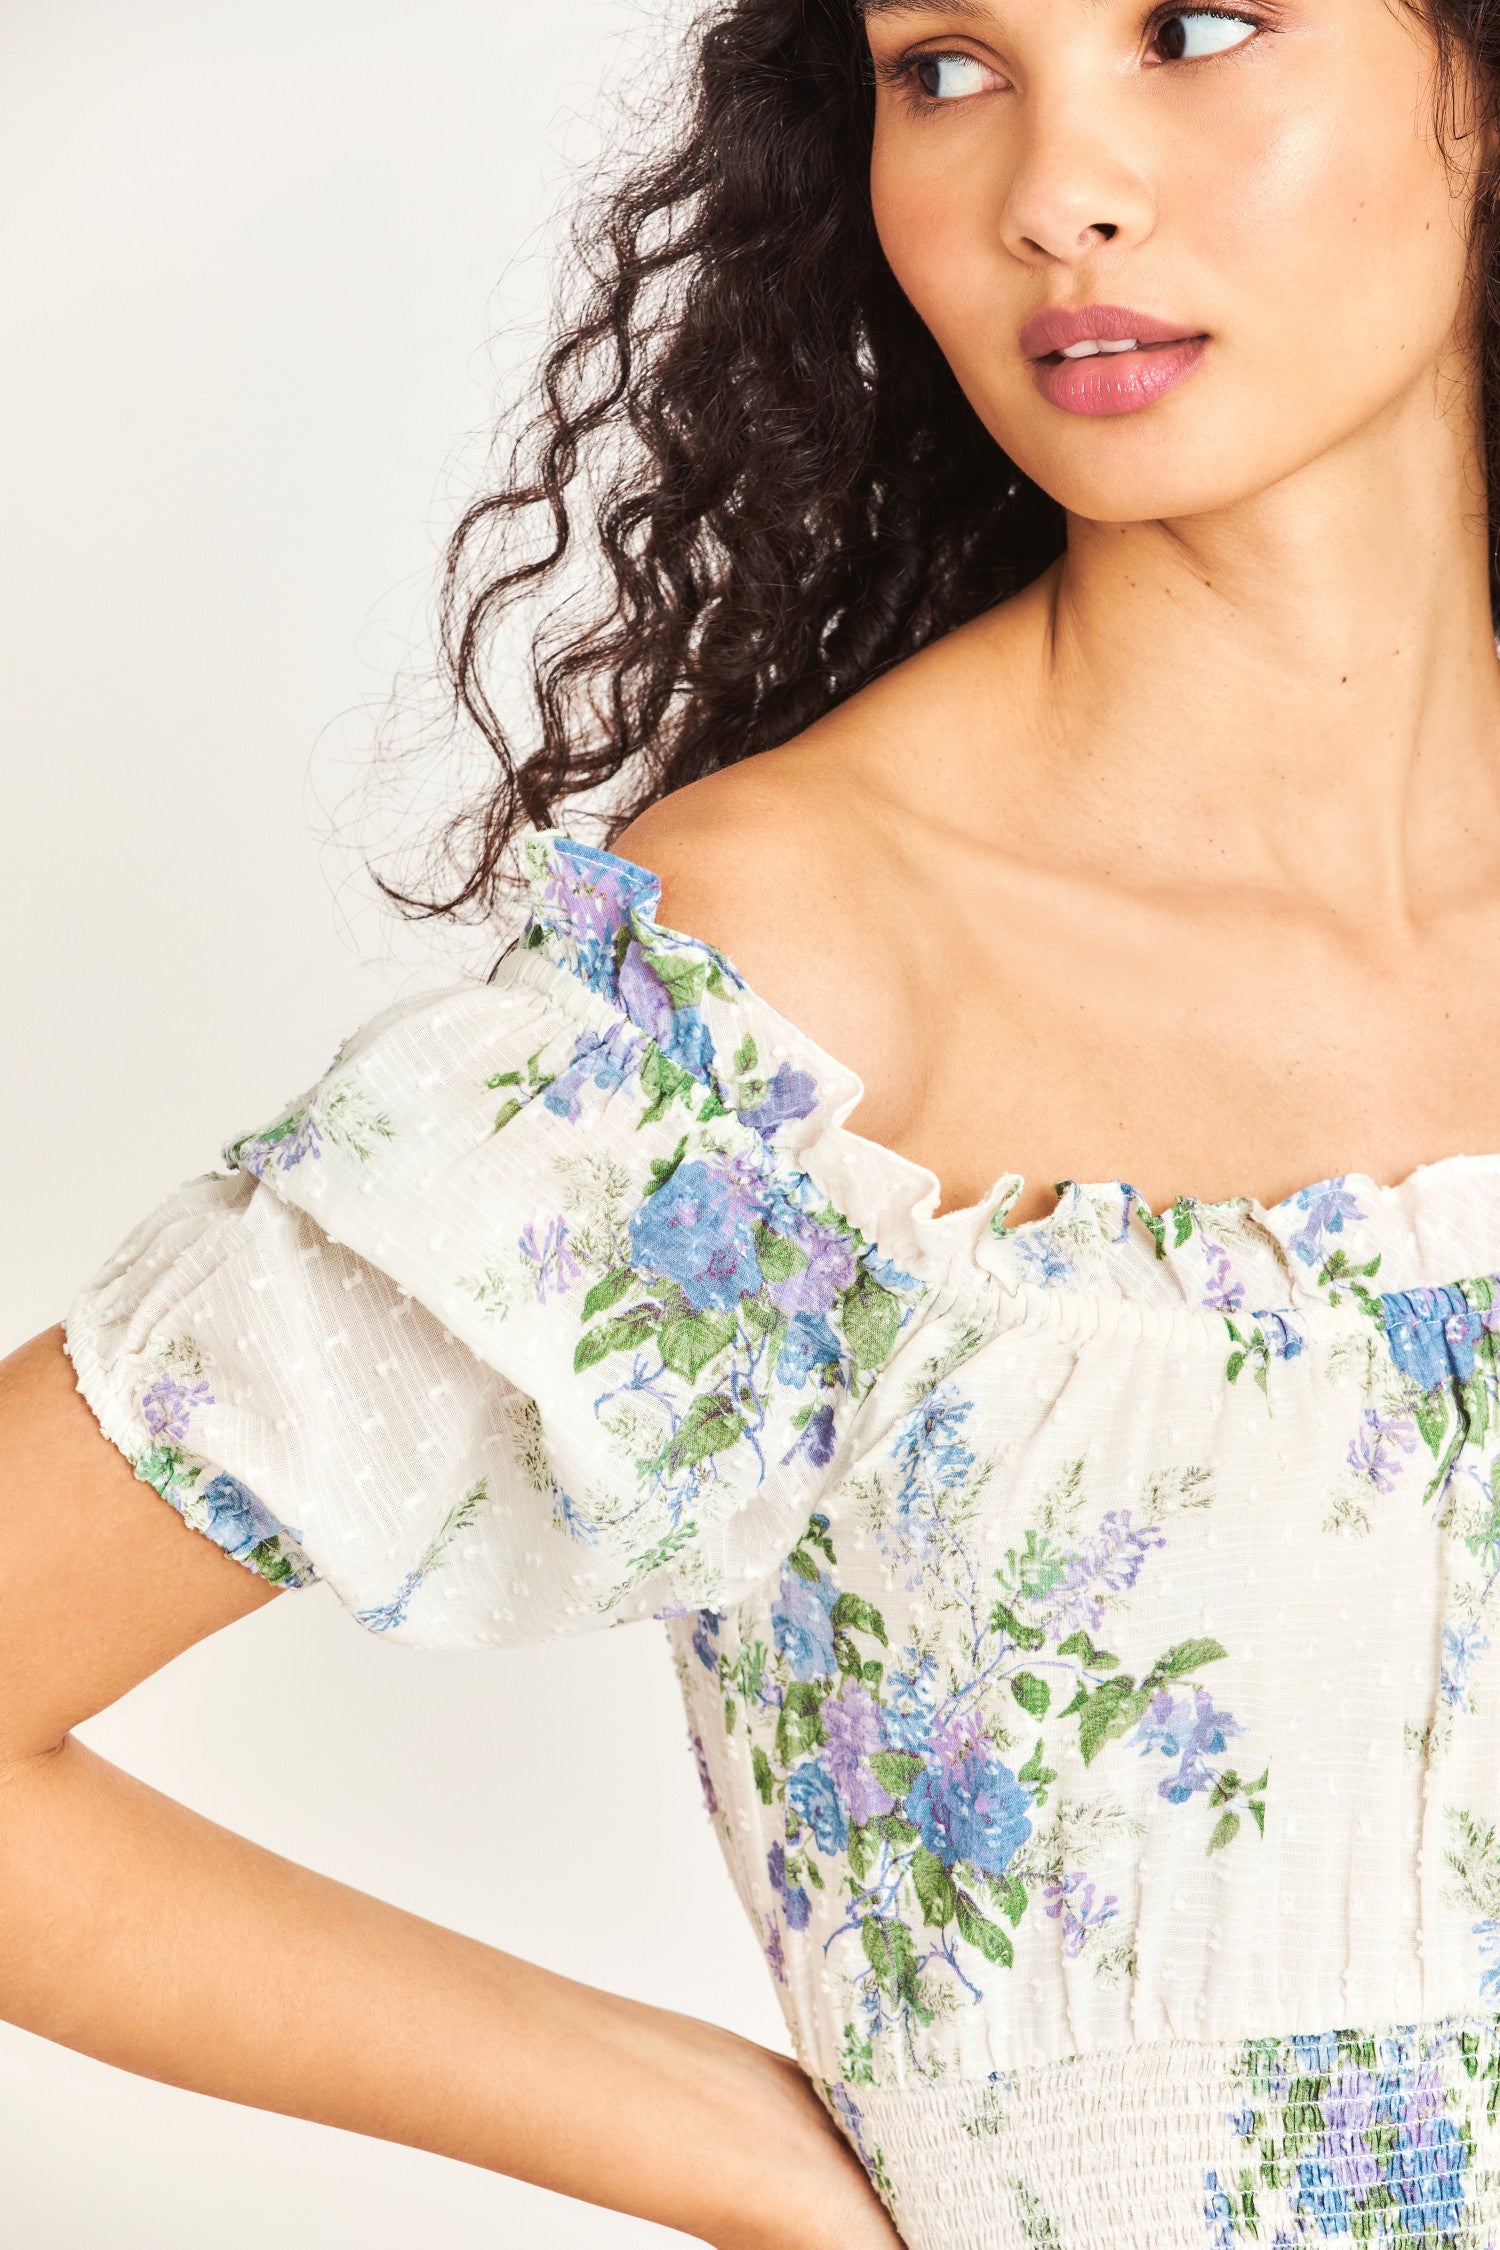 The Lai Dress in white features a blue heirloom bouquet print on a soft textured dot cotton fabric with an elasticated, ruffle-adorned neckline to be worn on or off the shoulder. It has a smocked waistband and cute puff sleeves. 